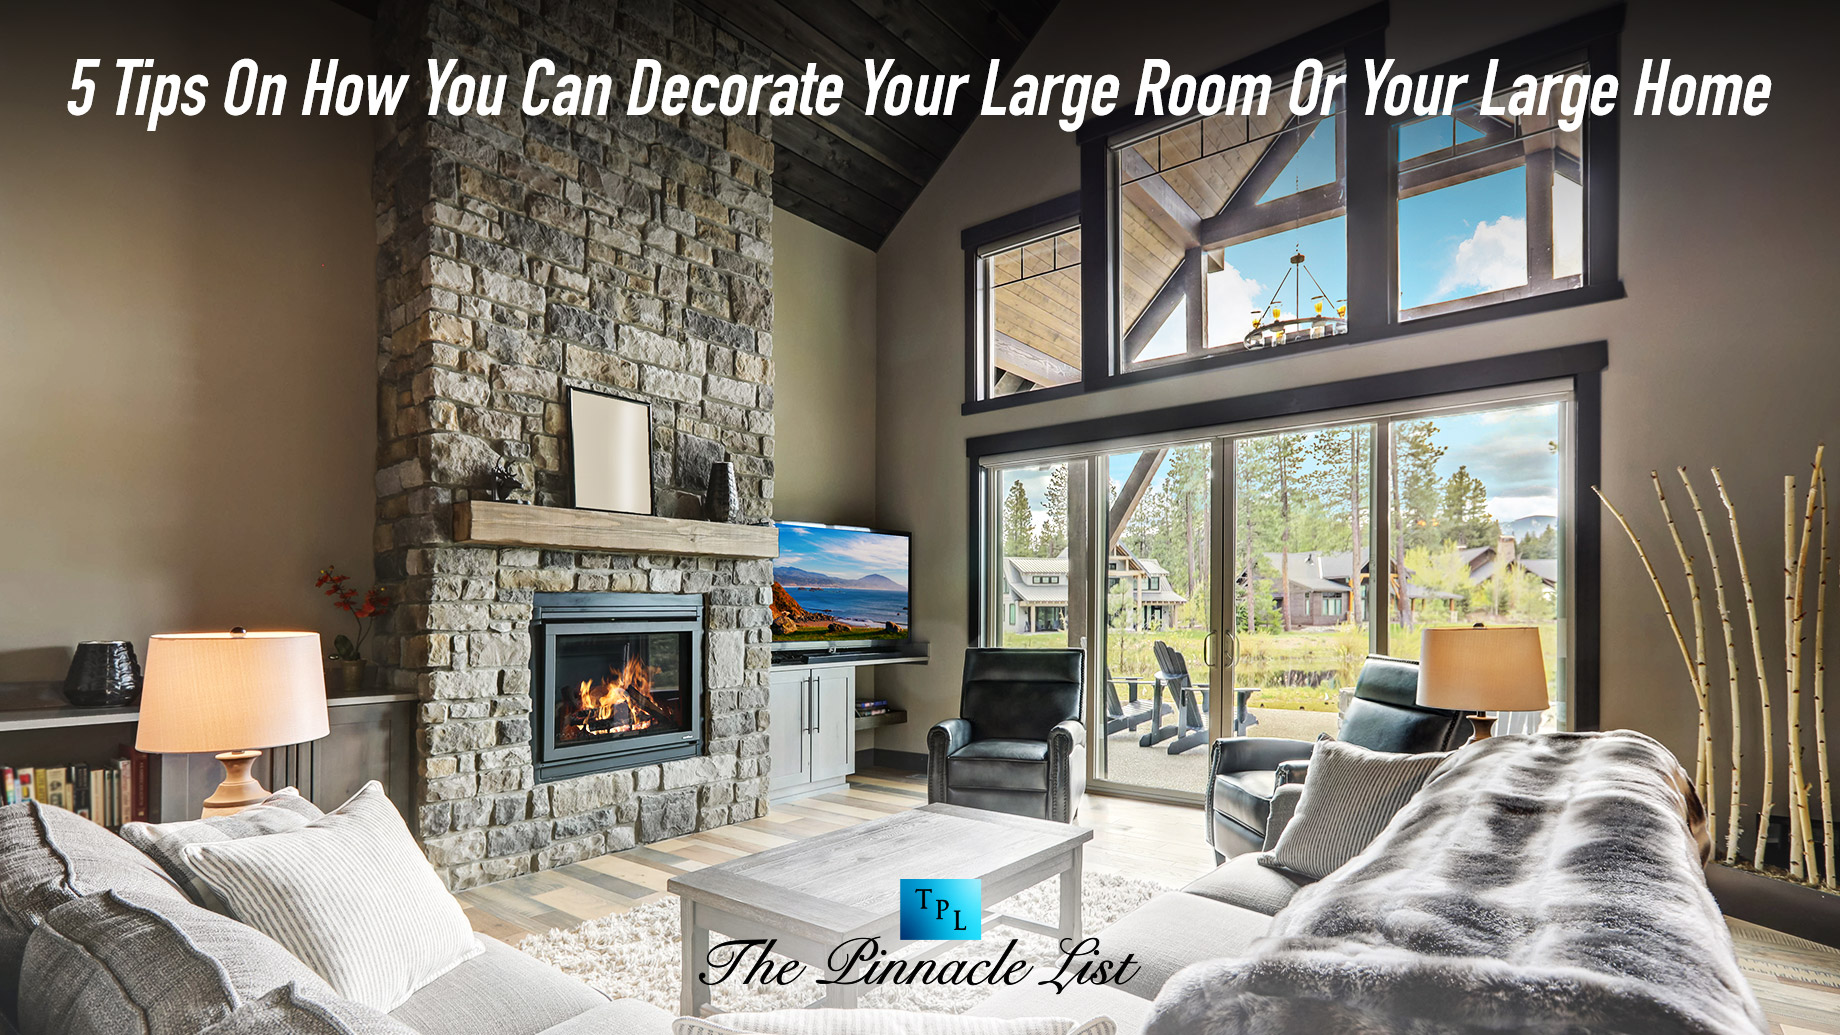 5 Tips On How You Can Decorate Your Large Room Or Your Large Home